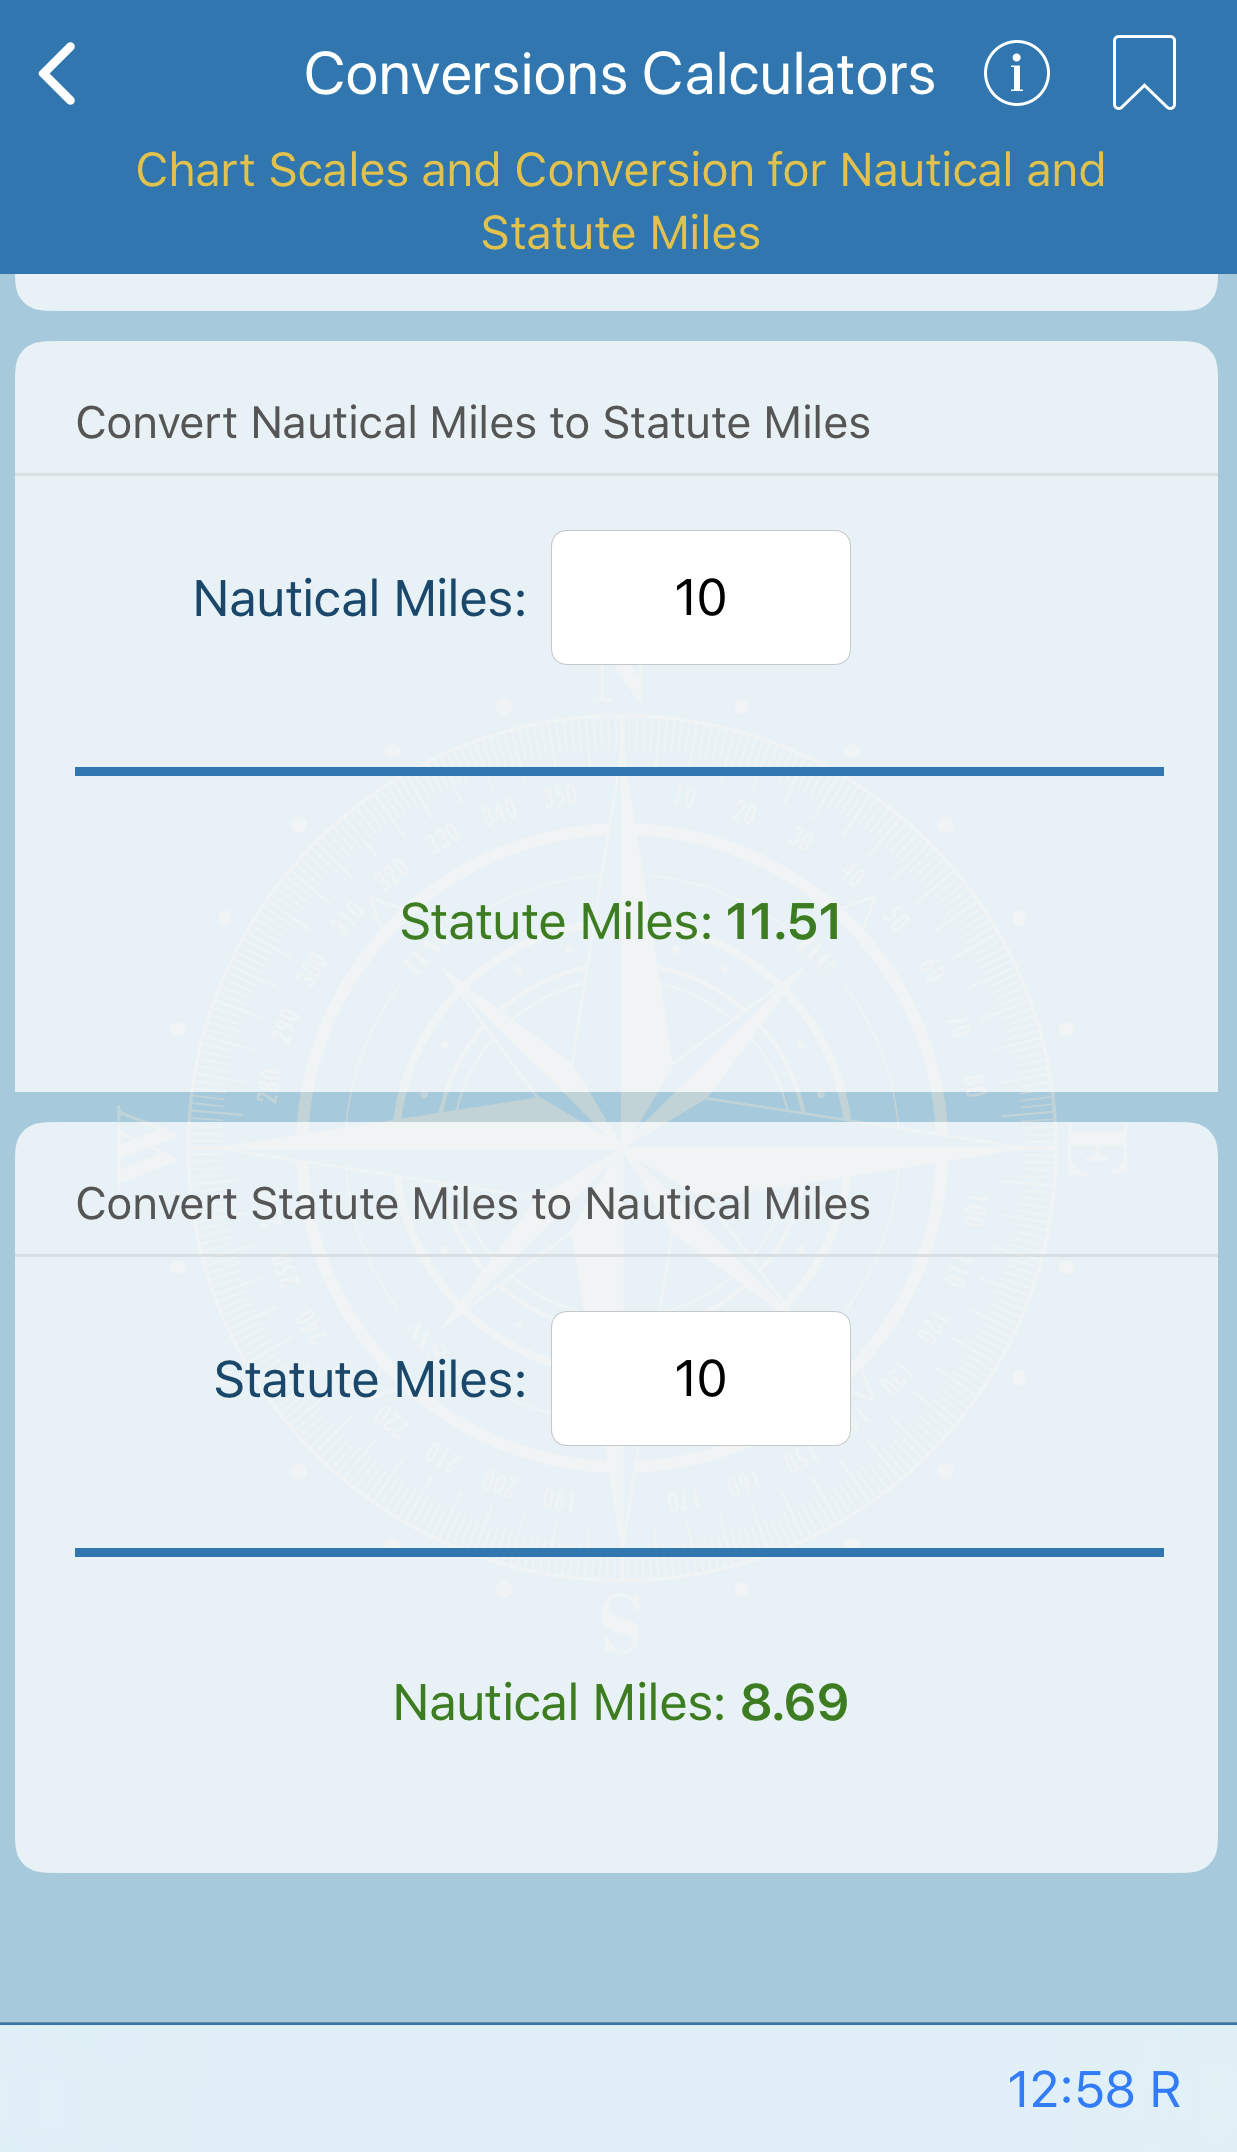 Conversion for Nautical and Statute Miles